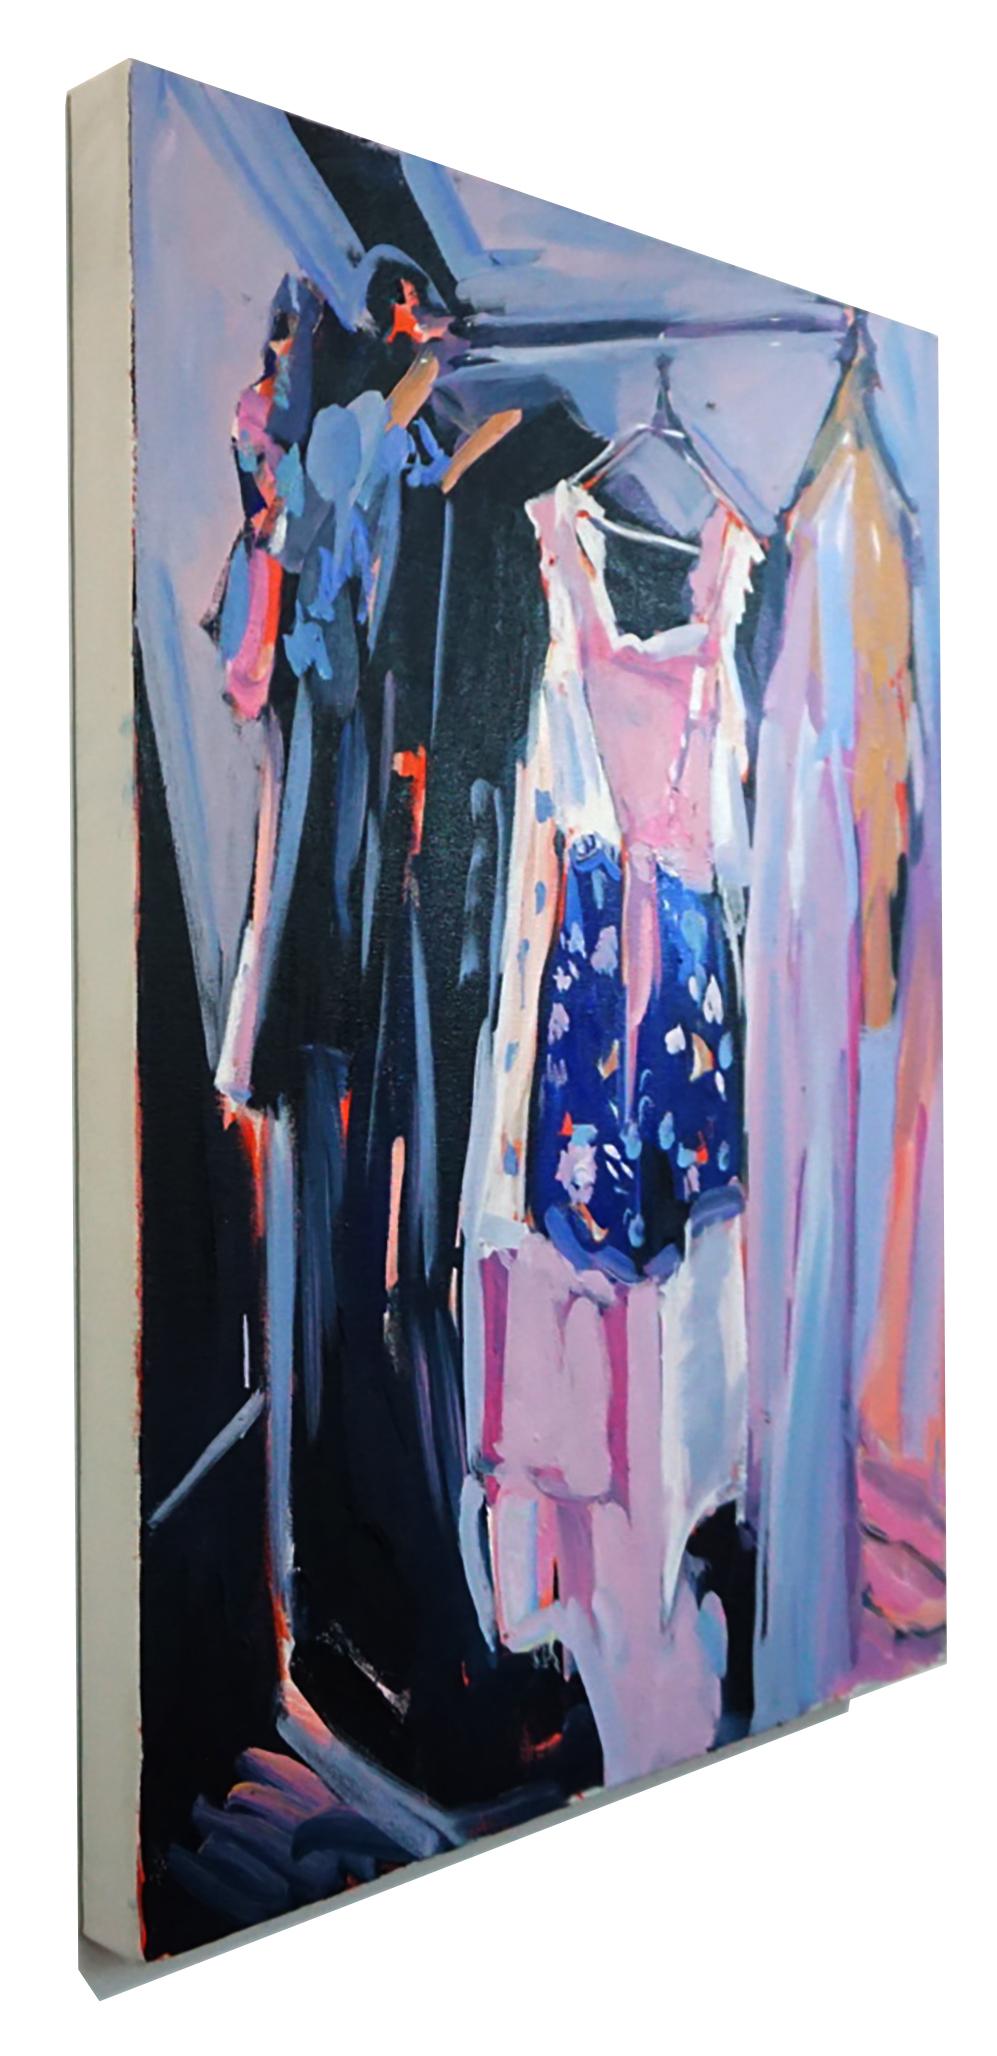 Going Out, Oil on canvas, bright and textured bedroom series with clothing - Painting by Ekaterina Popova